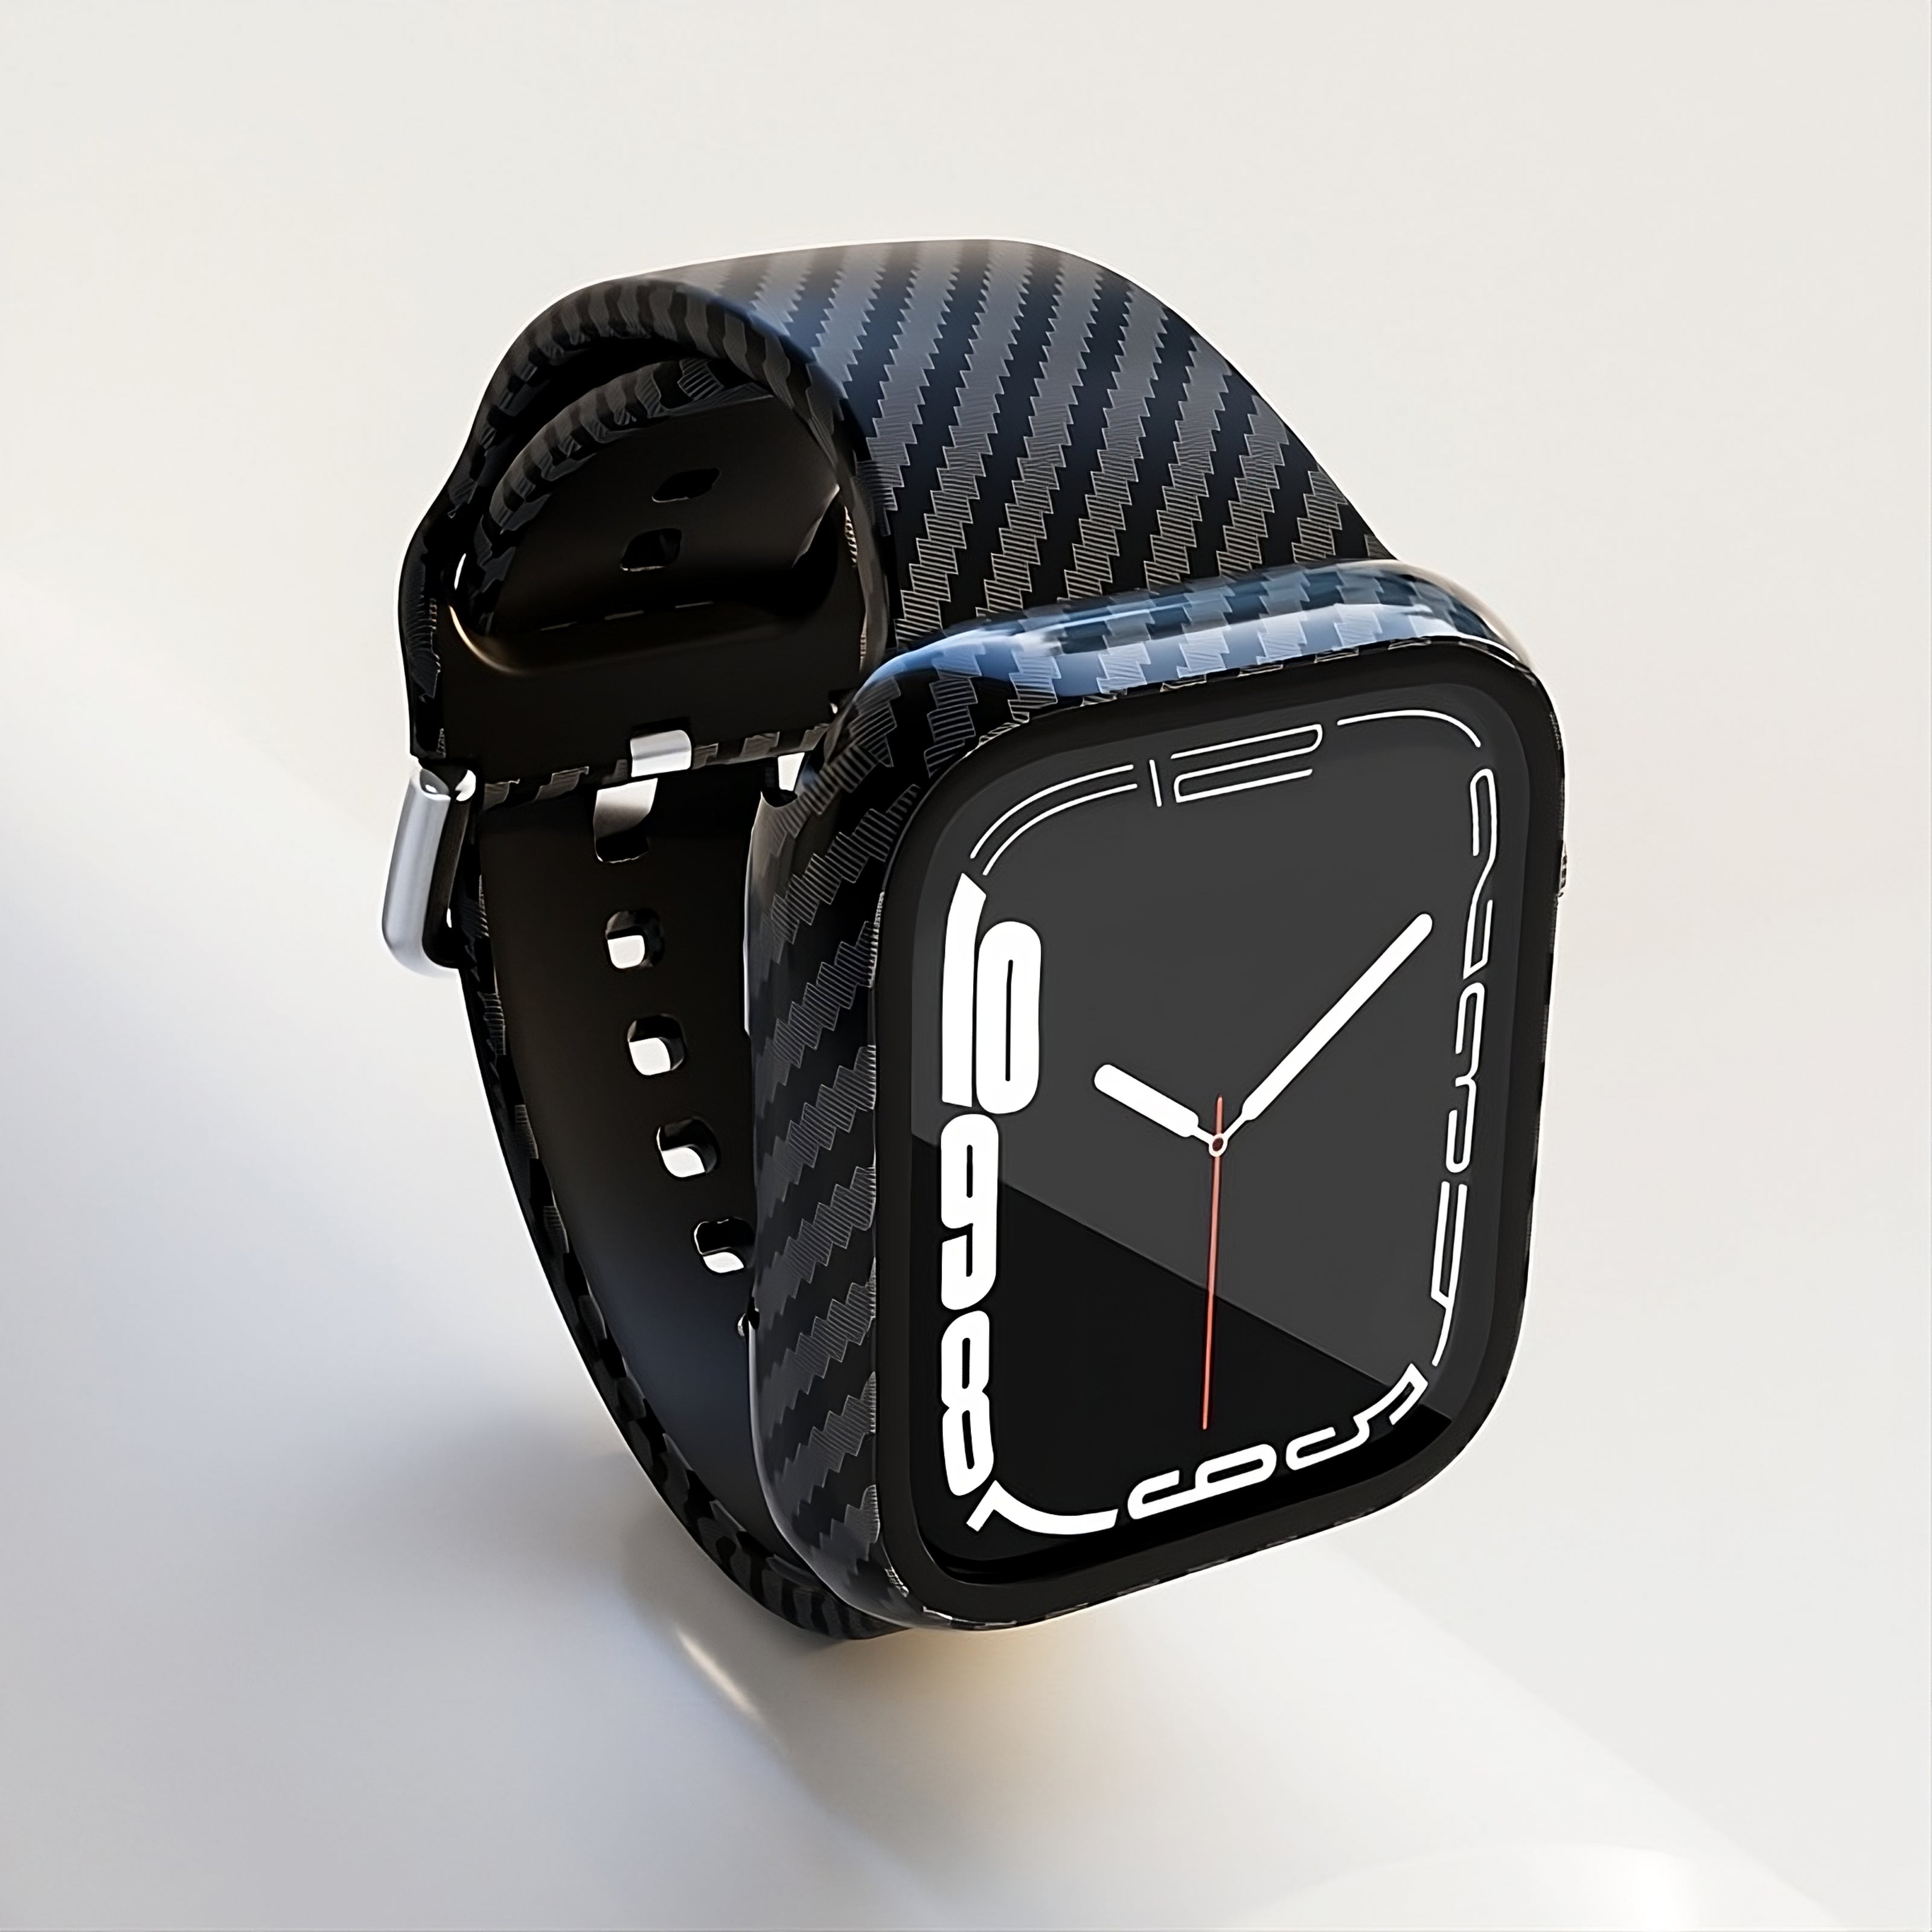 Apple Watch Case and Band